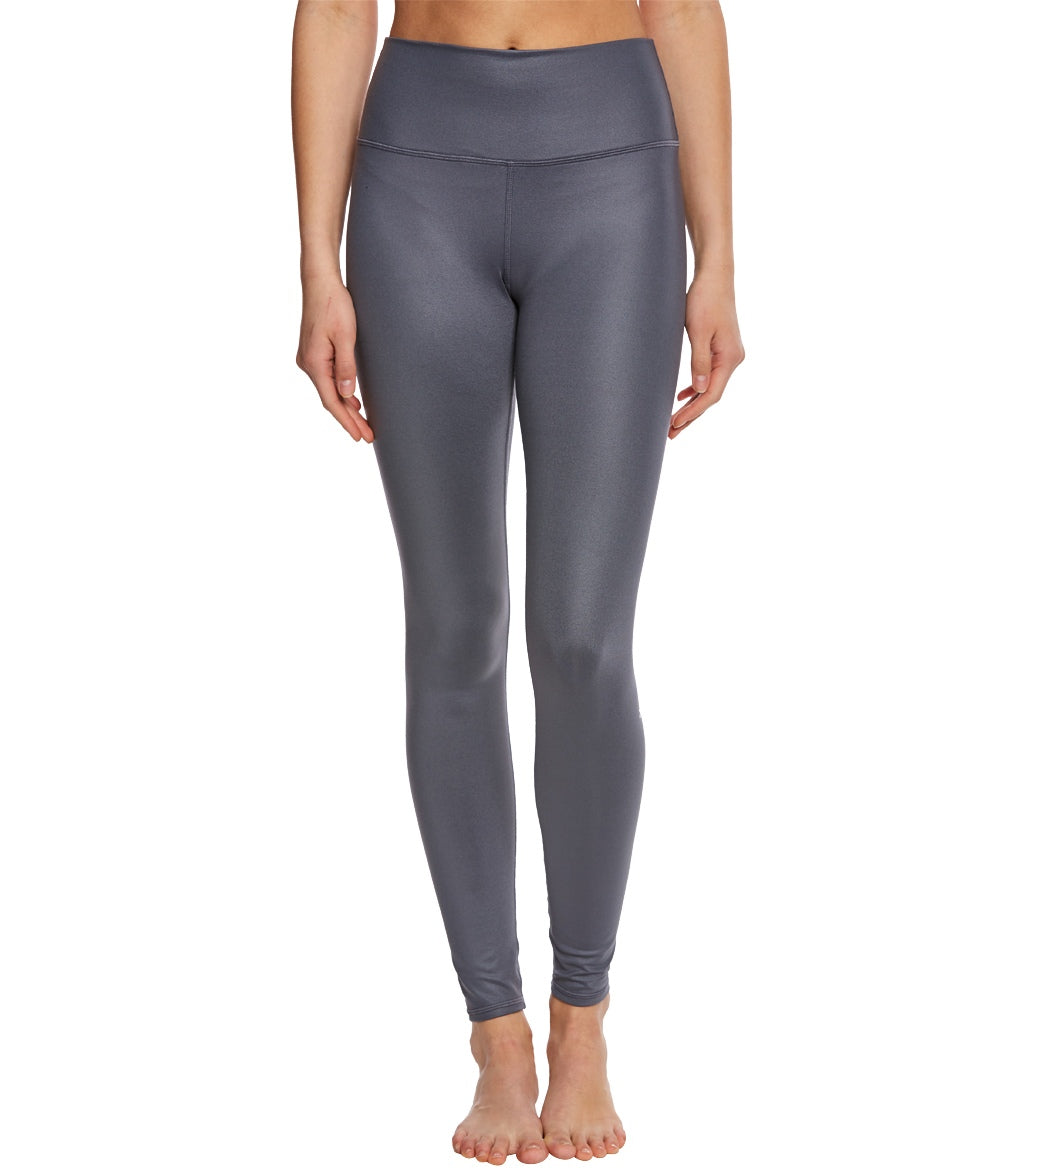 Our Editor's All-Time Favorite Yoga Pants | Style | Editorialist